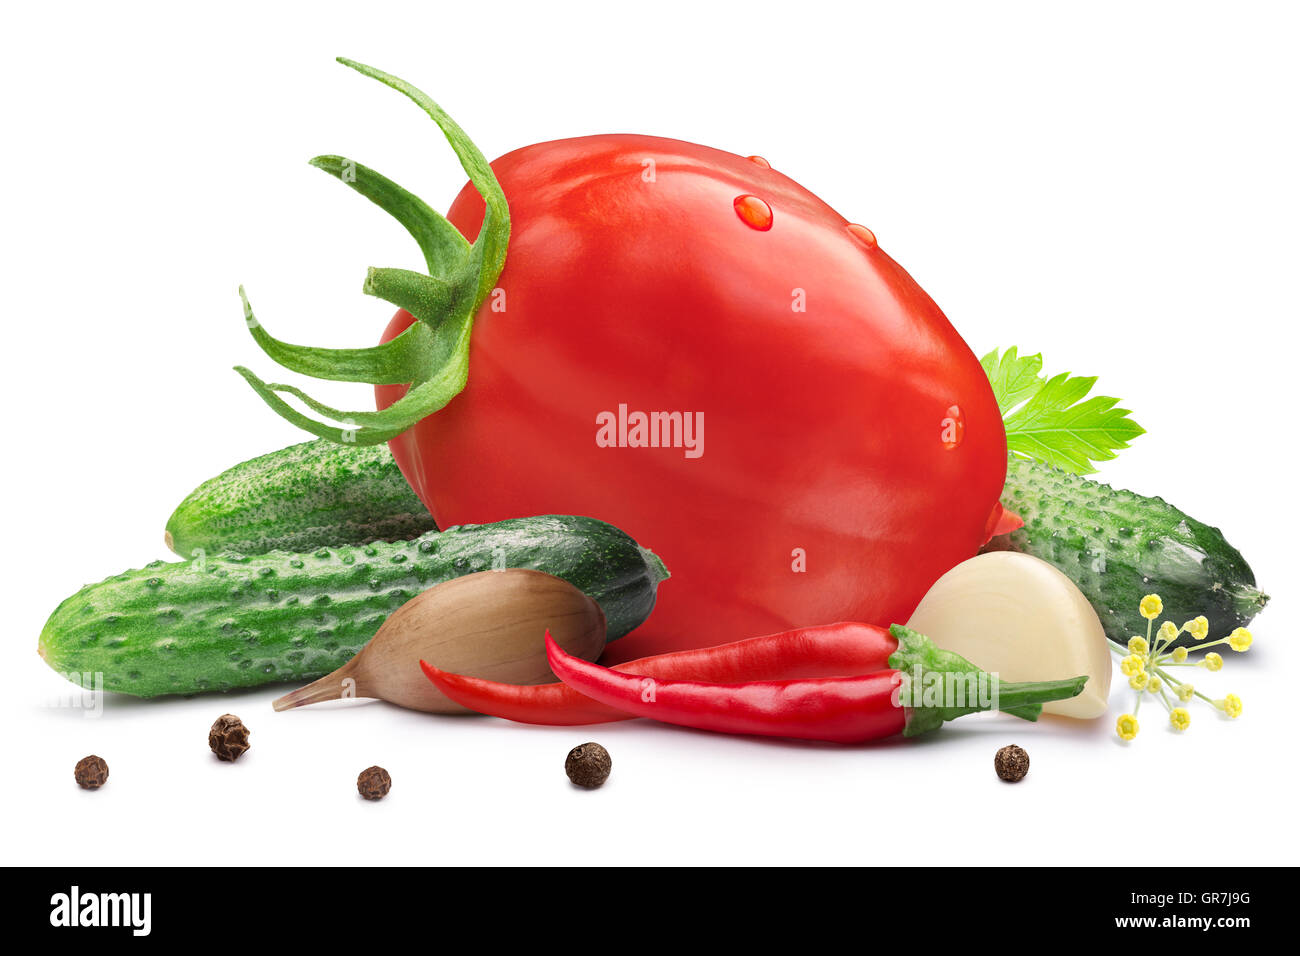 Gherkins (tiny cucumbers or cornichons) with oblong tomato for pickling or canning. Clipping path, shadow separated. Design elem Stock Photo